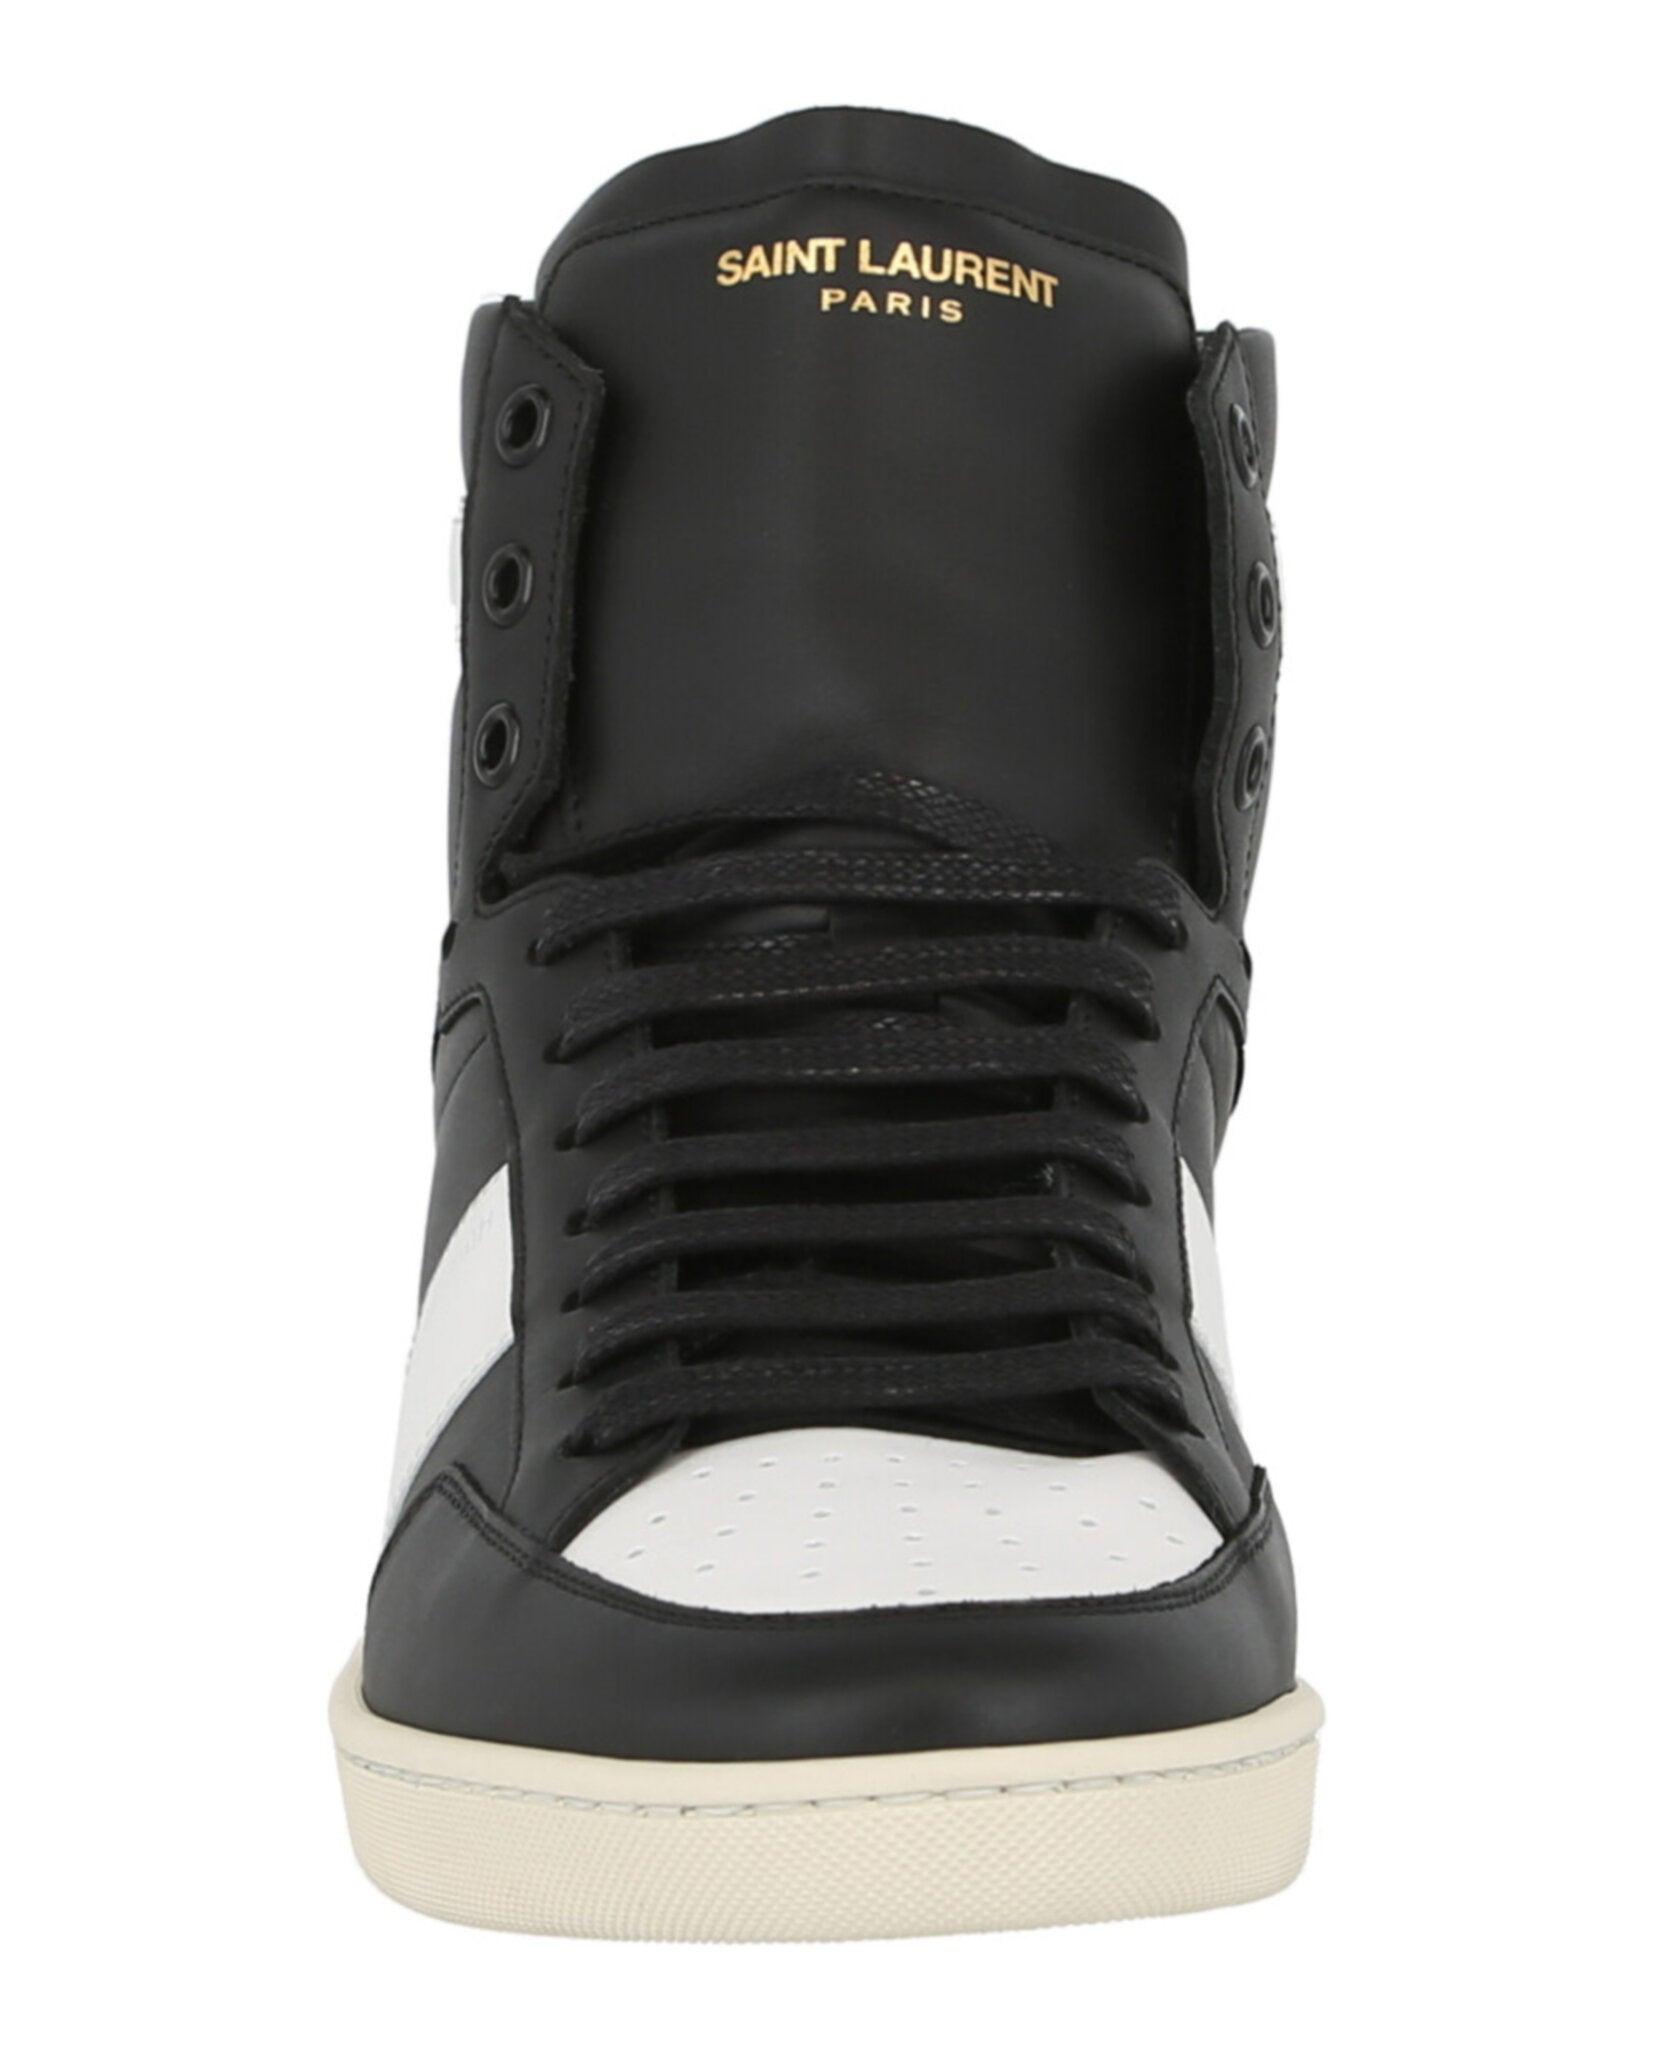 Saint Laurent Sl/10h Leather Sneakers in Black White (Black) for 